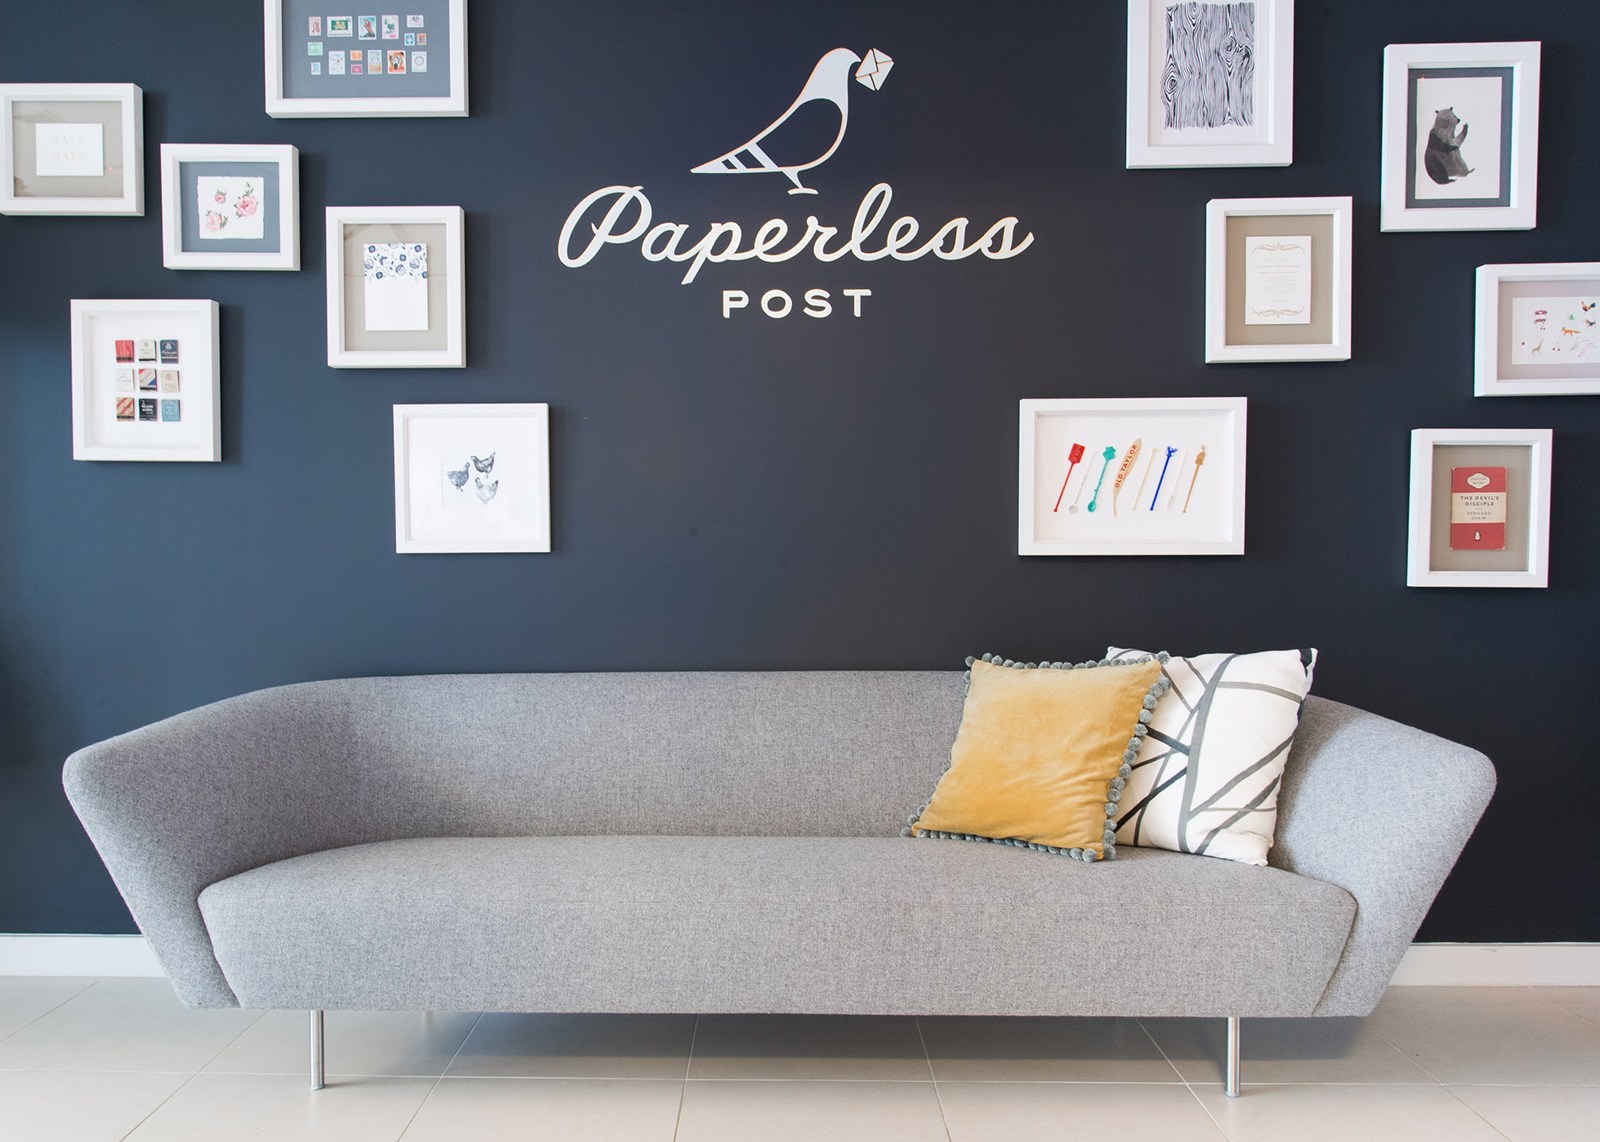 Inside Paperless Post’s New NYC Office